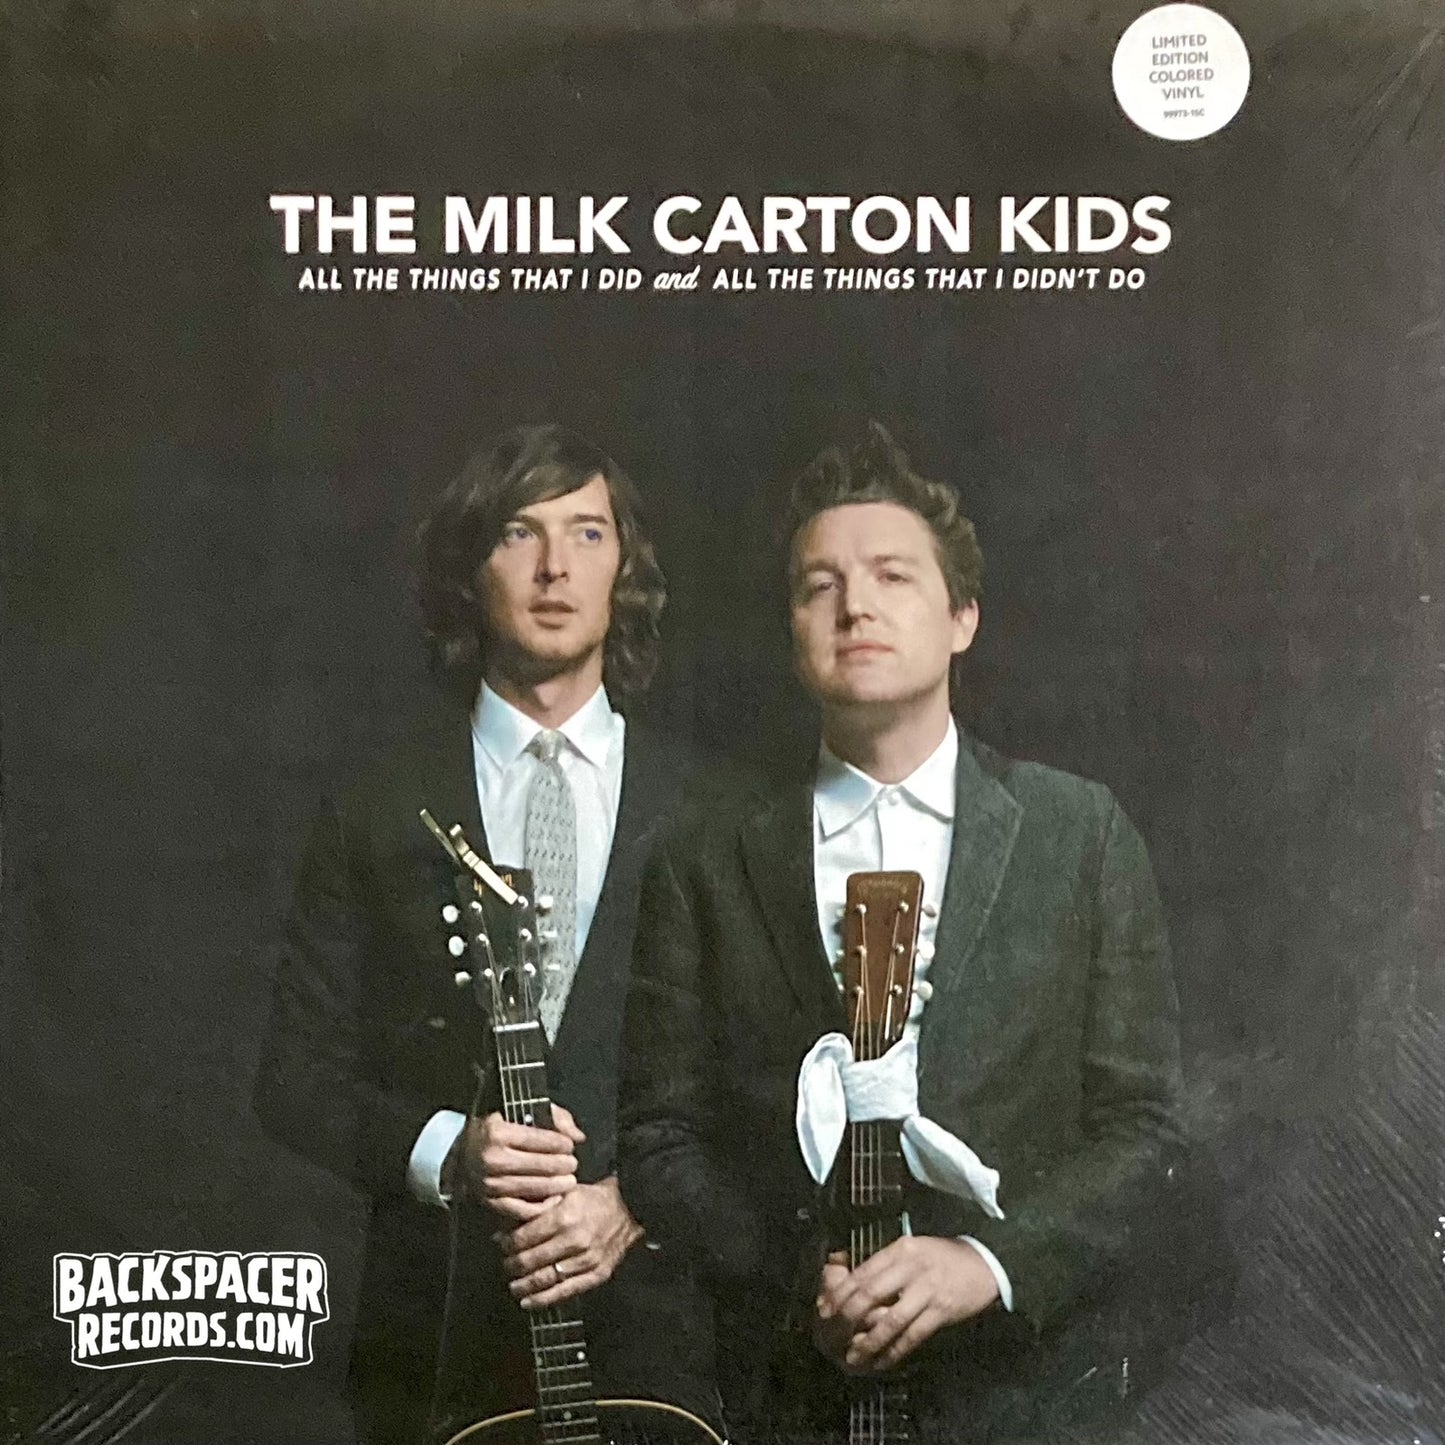 The Milk Carton Kids ‎– All The Things That I Did And All The Things That I Didn't Do (Limited Edition) 2-LP (Sealed)